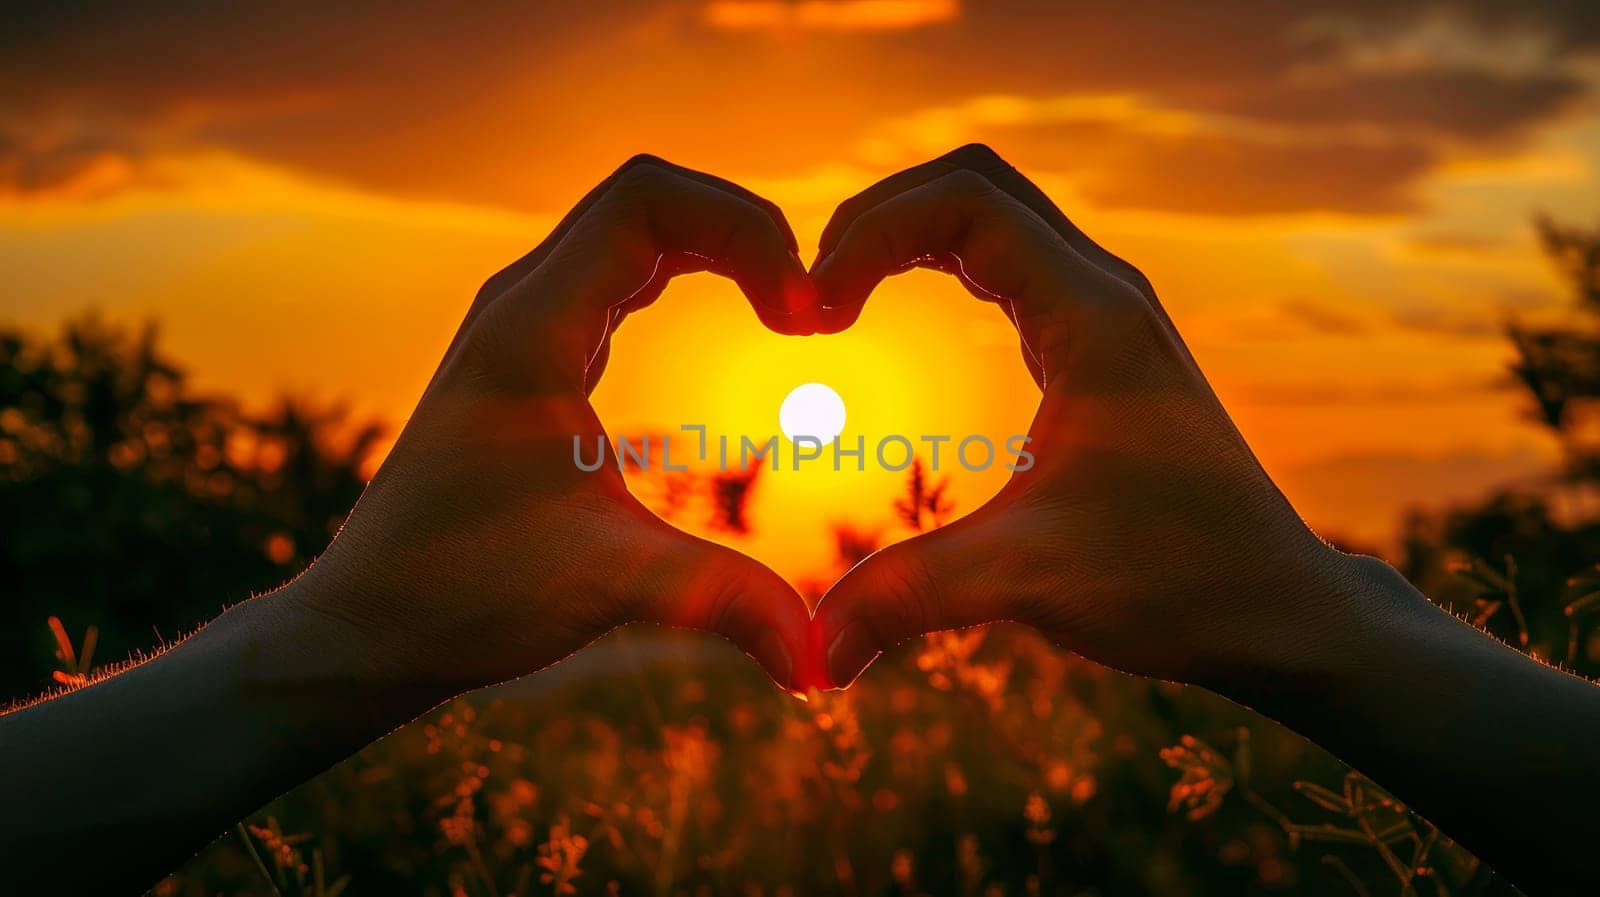 Hands forming heart shape silhouette against vibrant sunset sky, symbolizing love, warmth and connection with nature